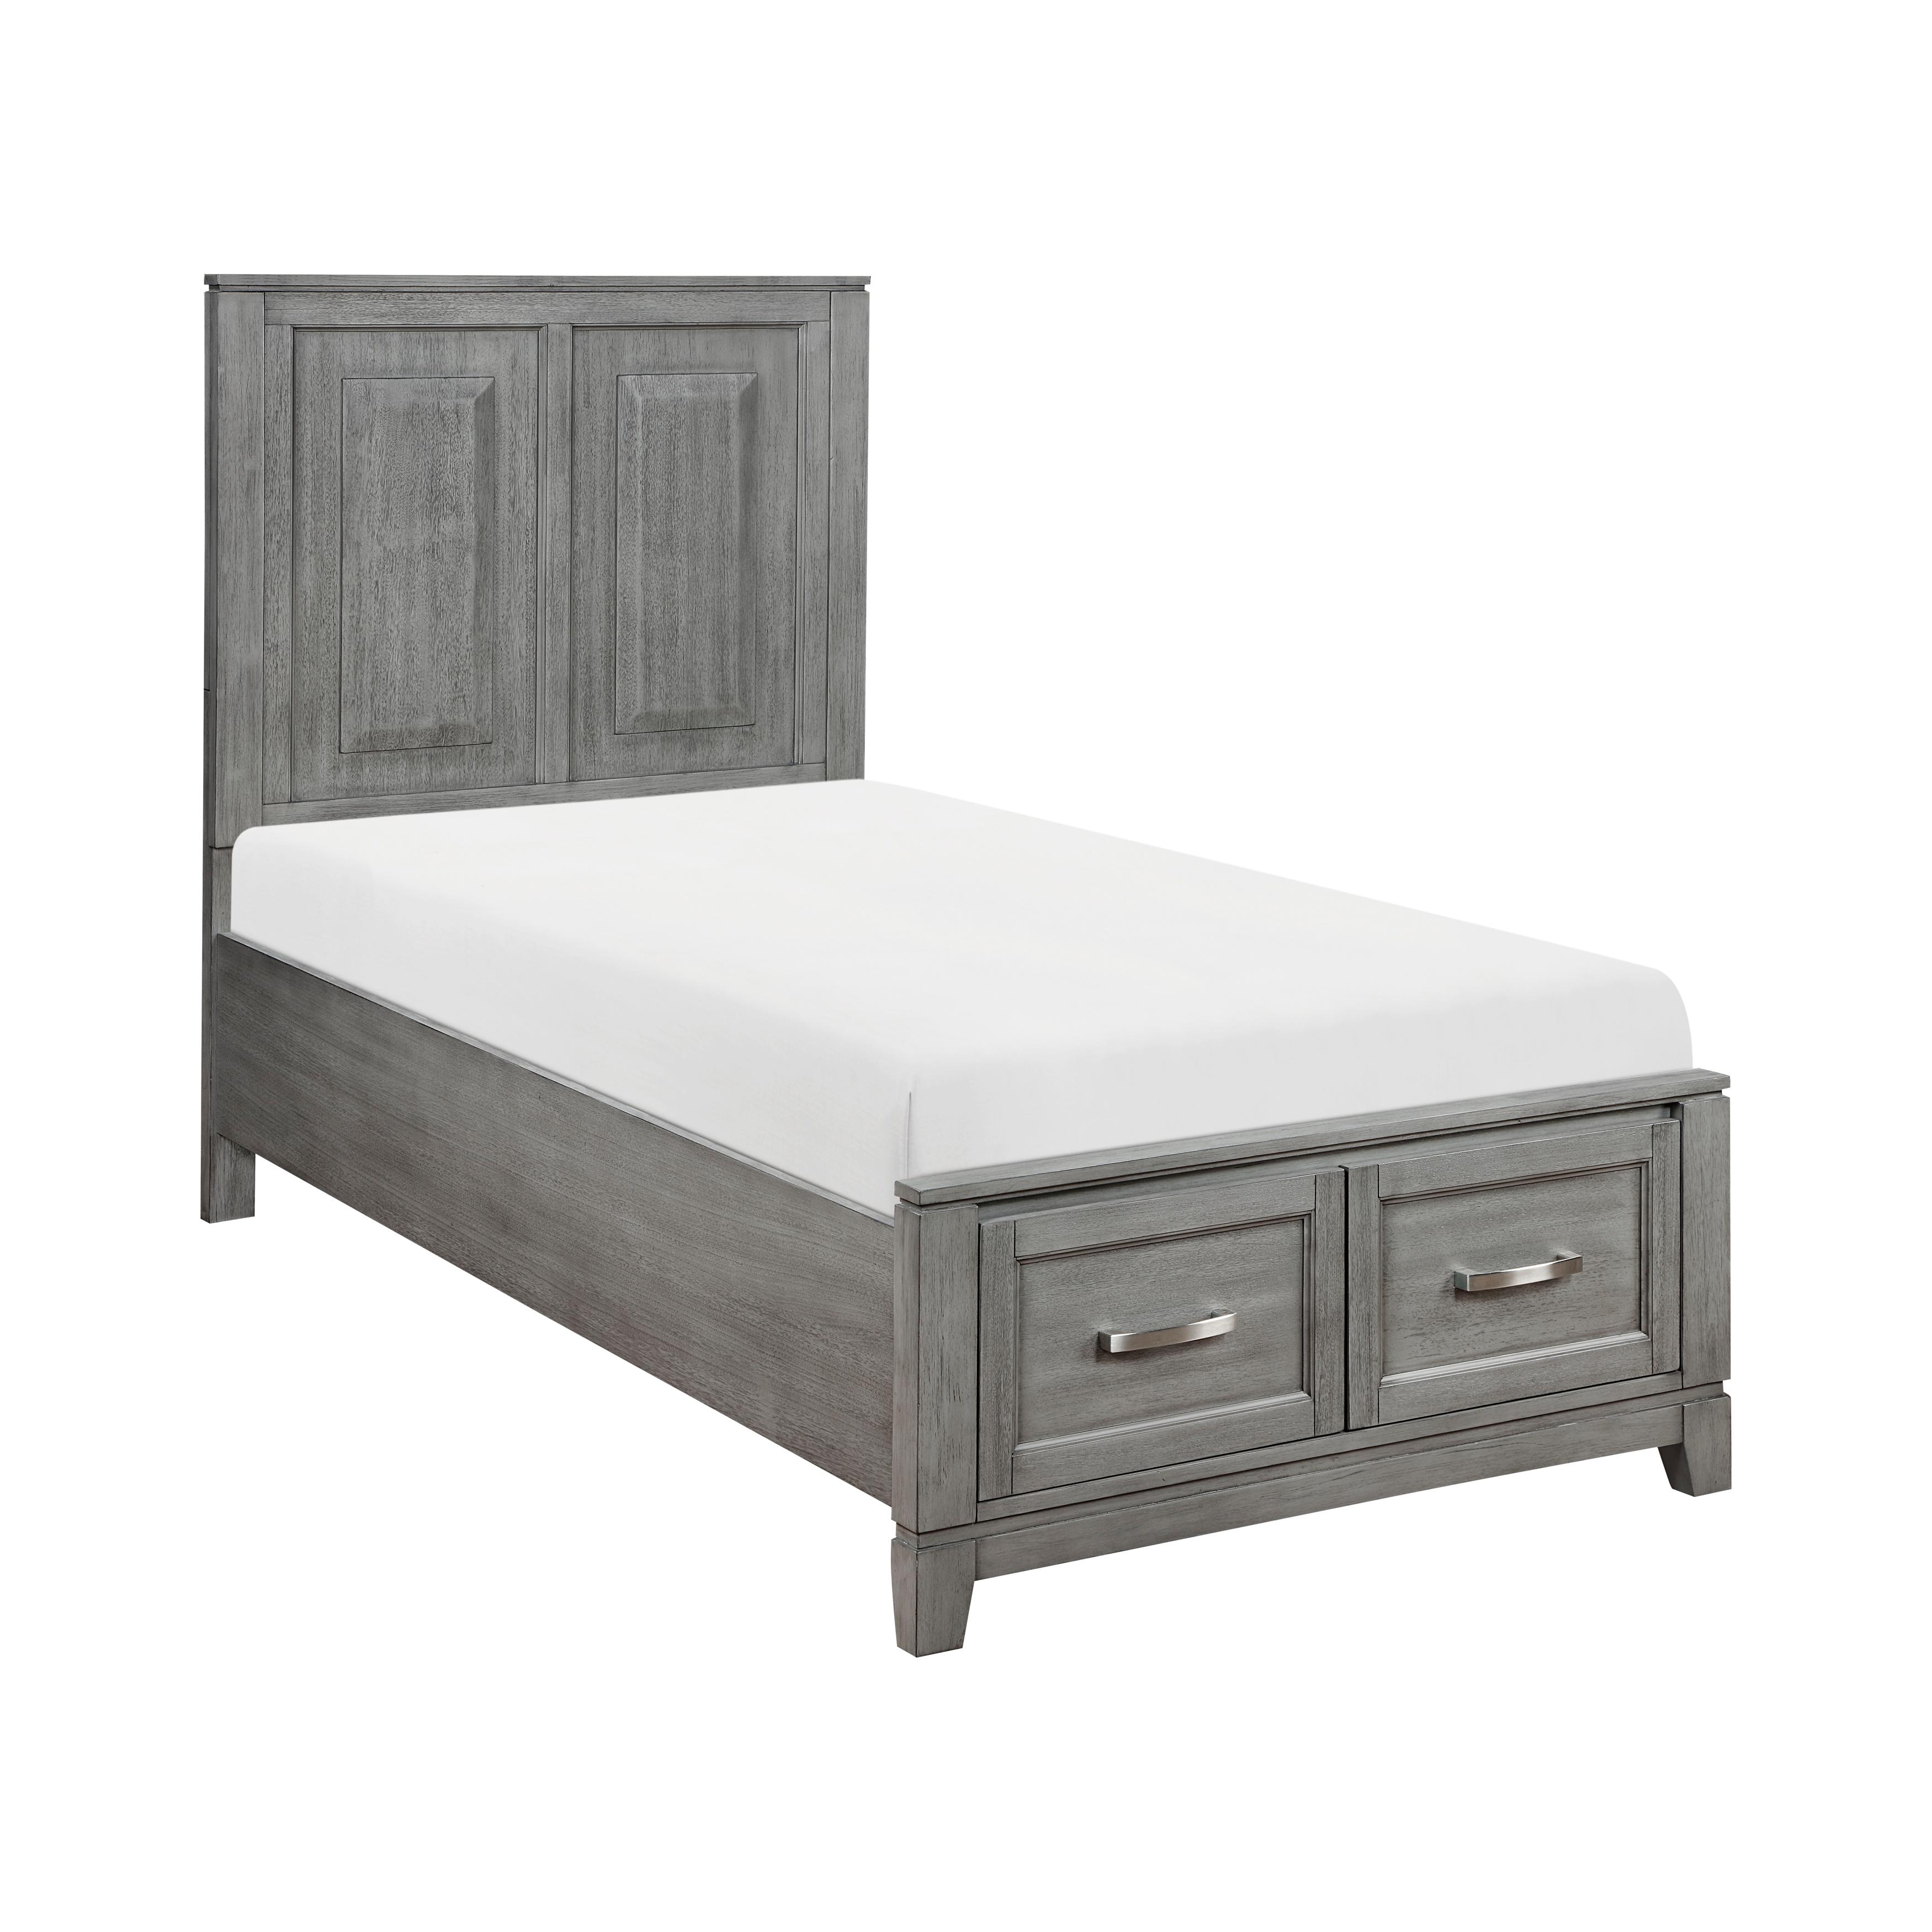 Transitional, Rustic Platform Bed Garretson Twin Platform Bed 1450T-1-T 1450T-1-T in Gray 